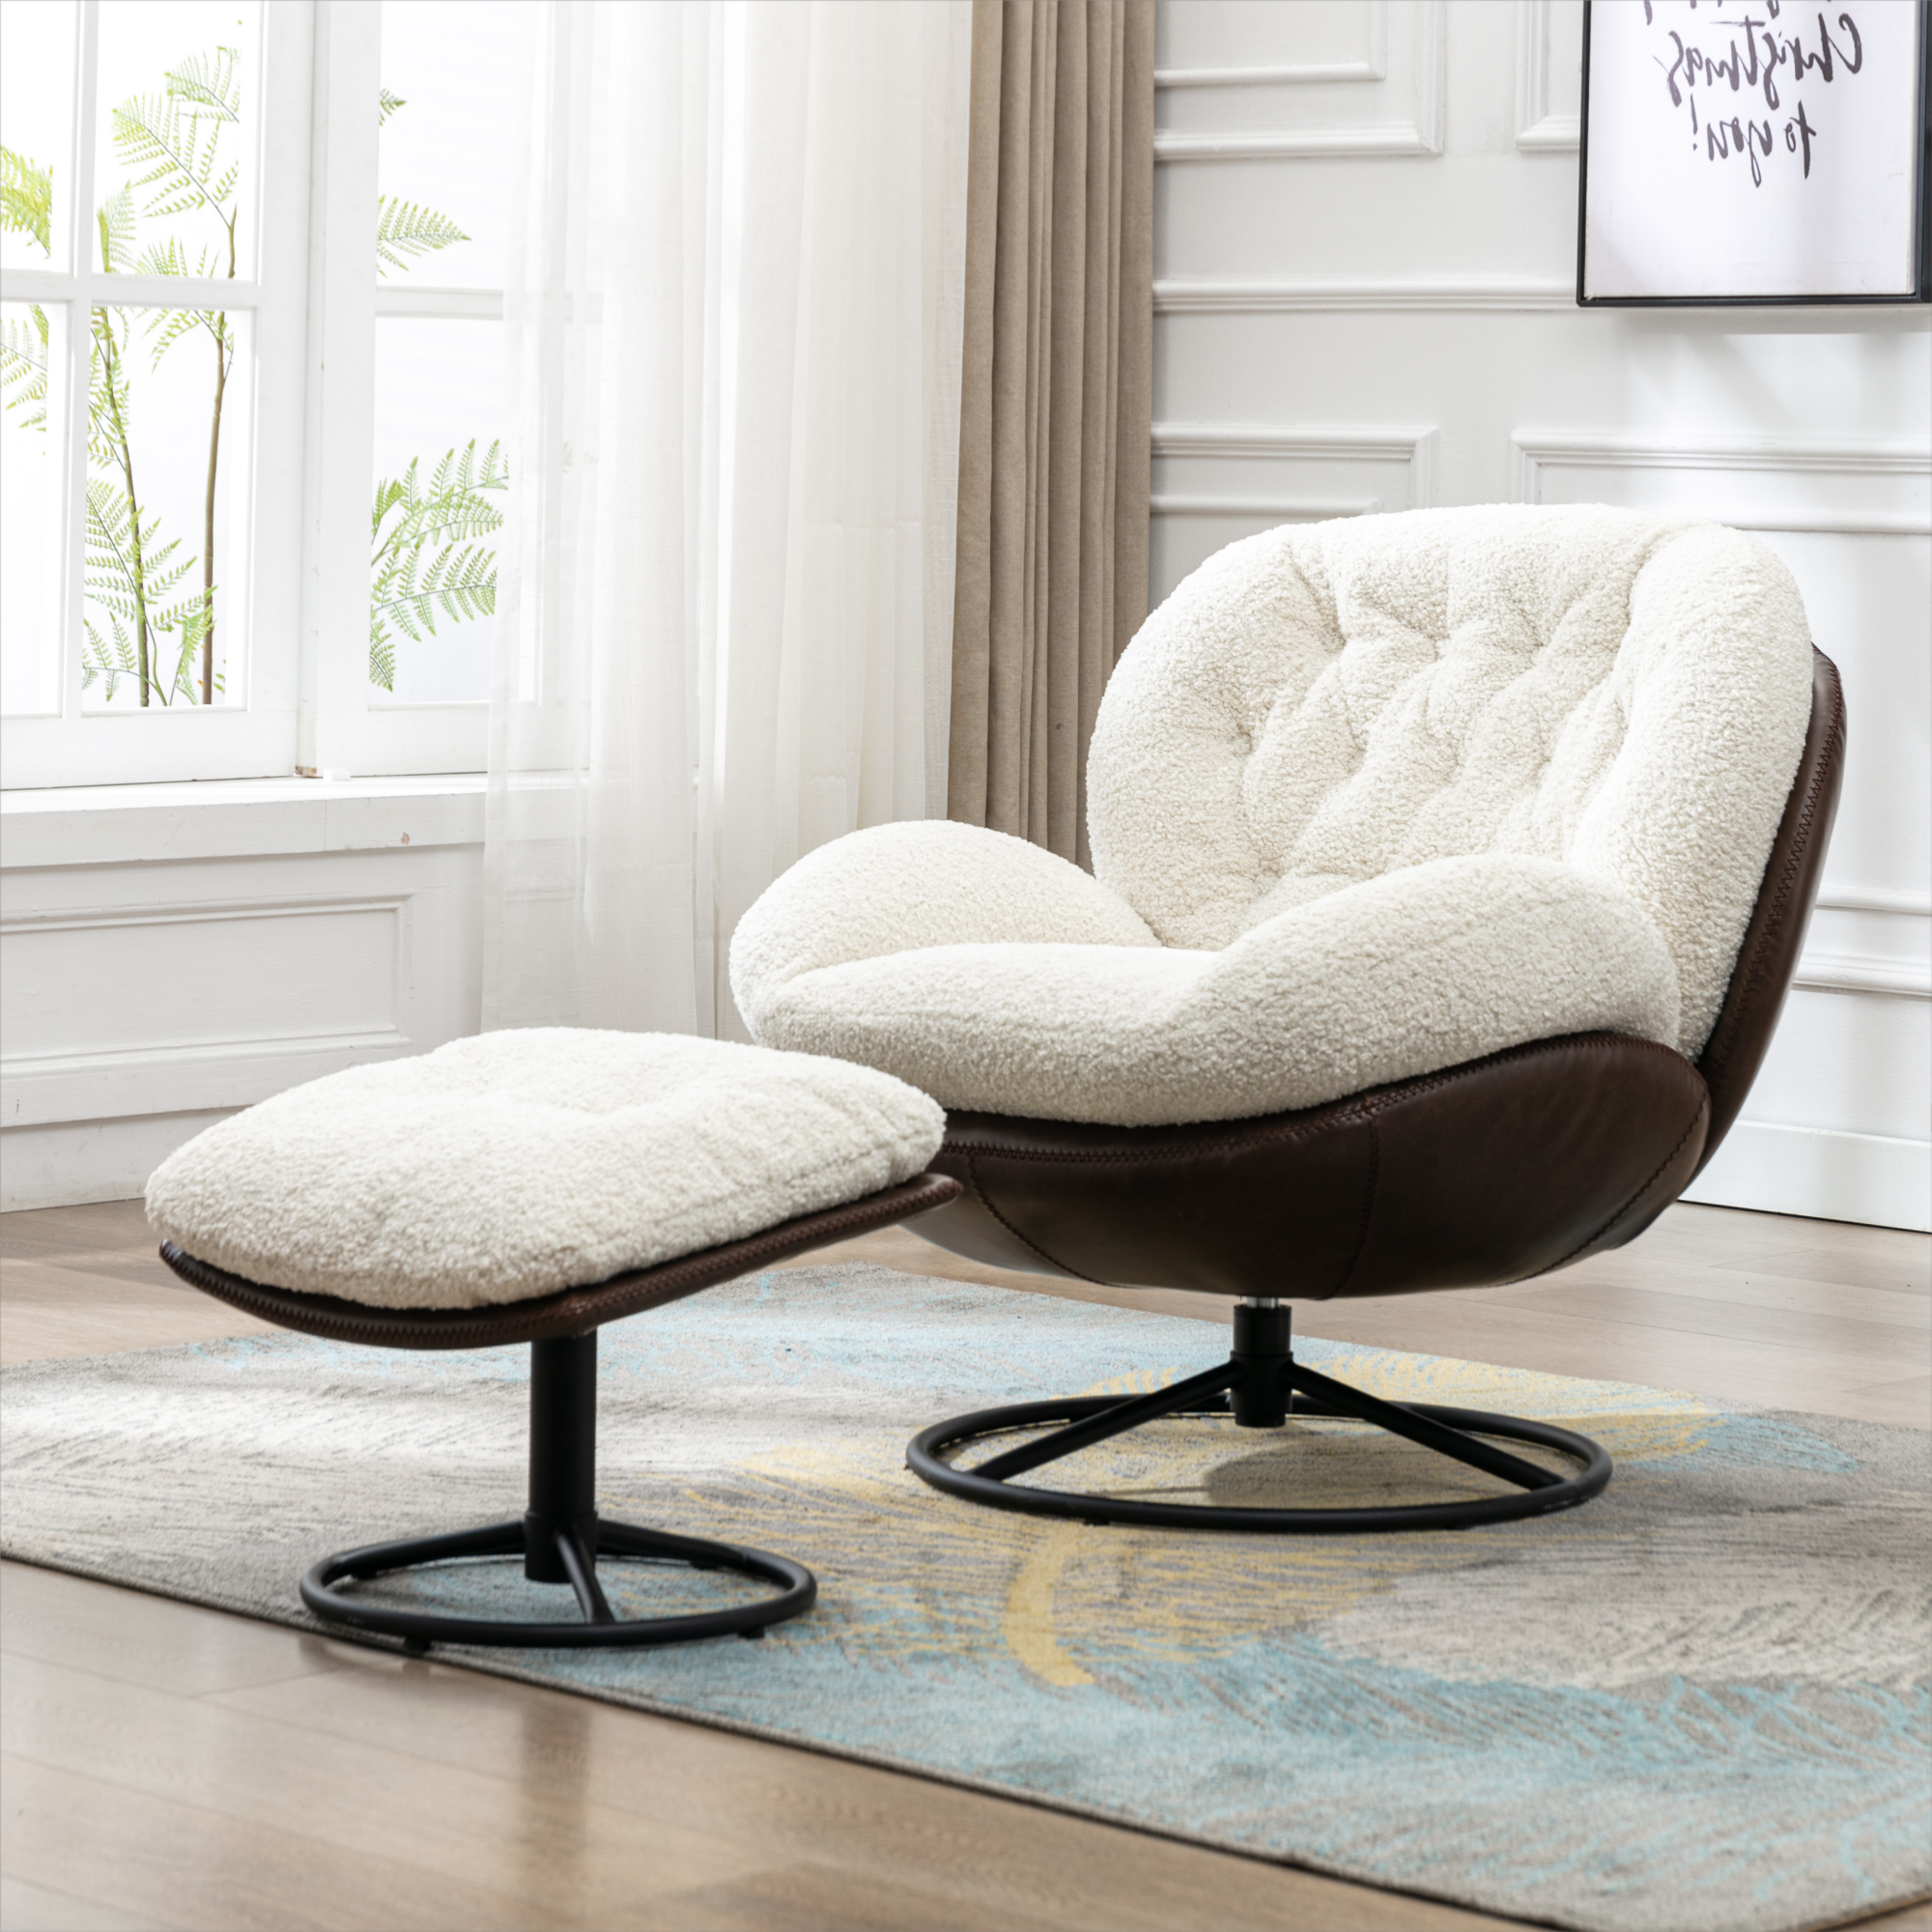 Nevan Lounge Chair with Ottoman